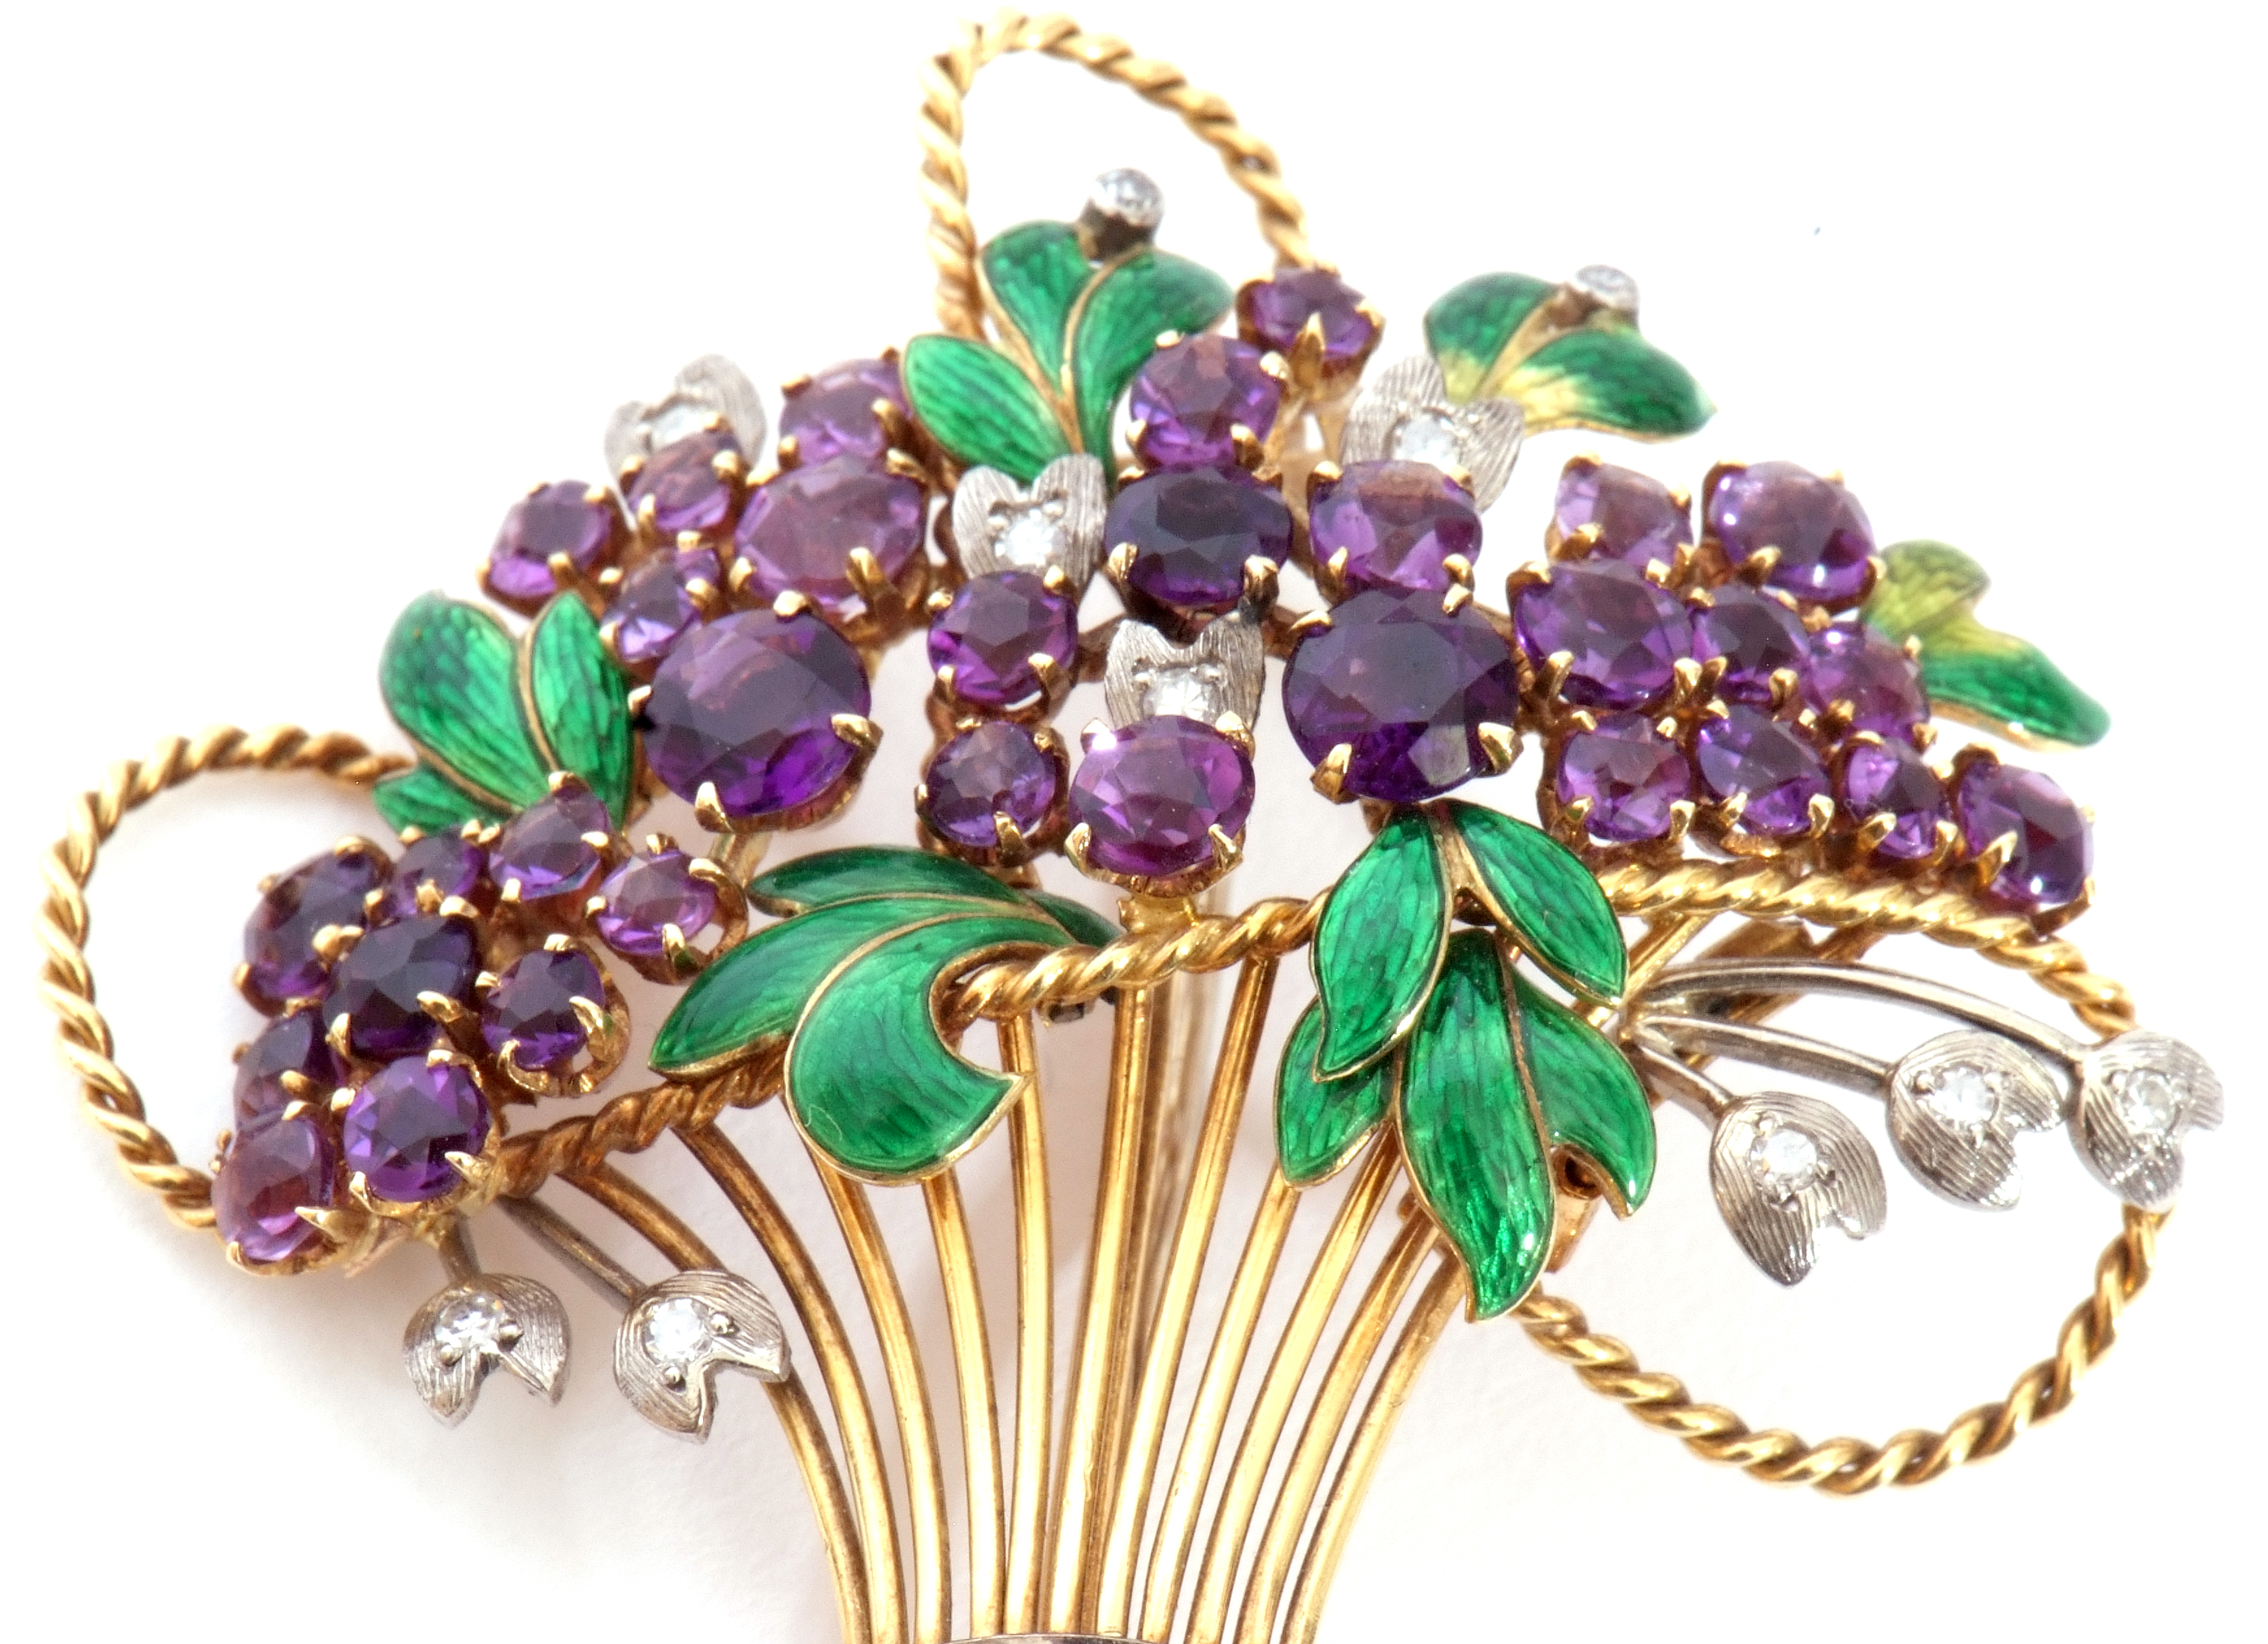 Enamel and amethyst jardiniere brooch circa 1965, the open work basket with wire work detailing, - Image 5 of 6